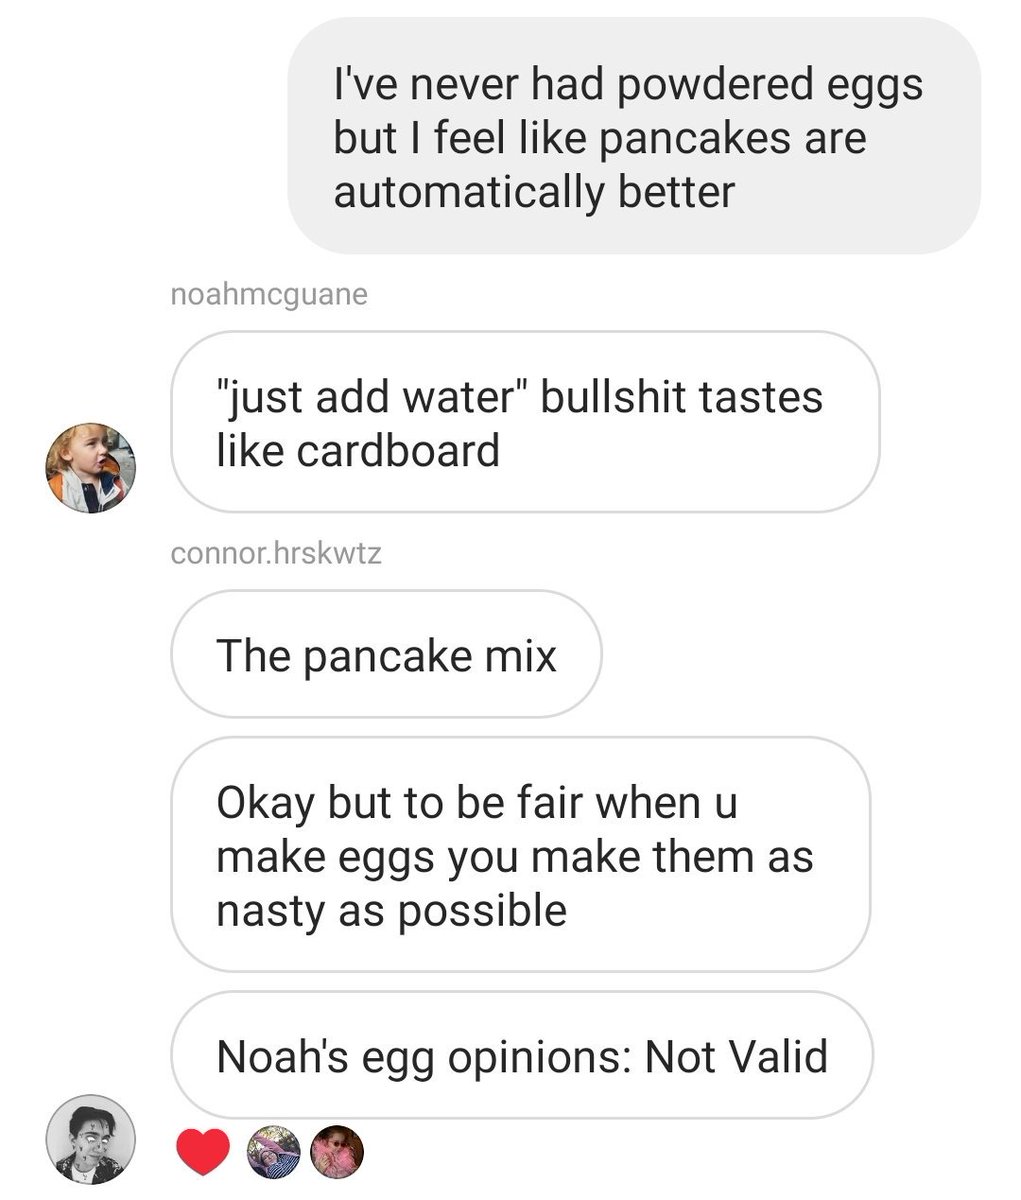 This whole powdered eggs convo